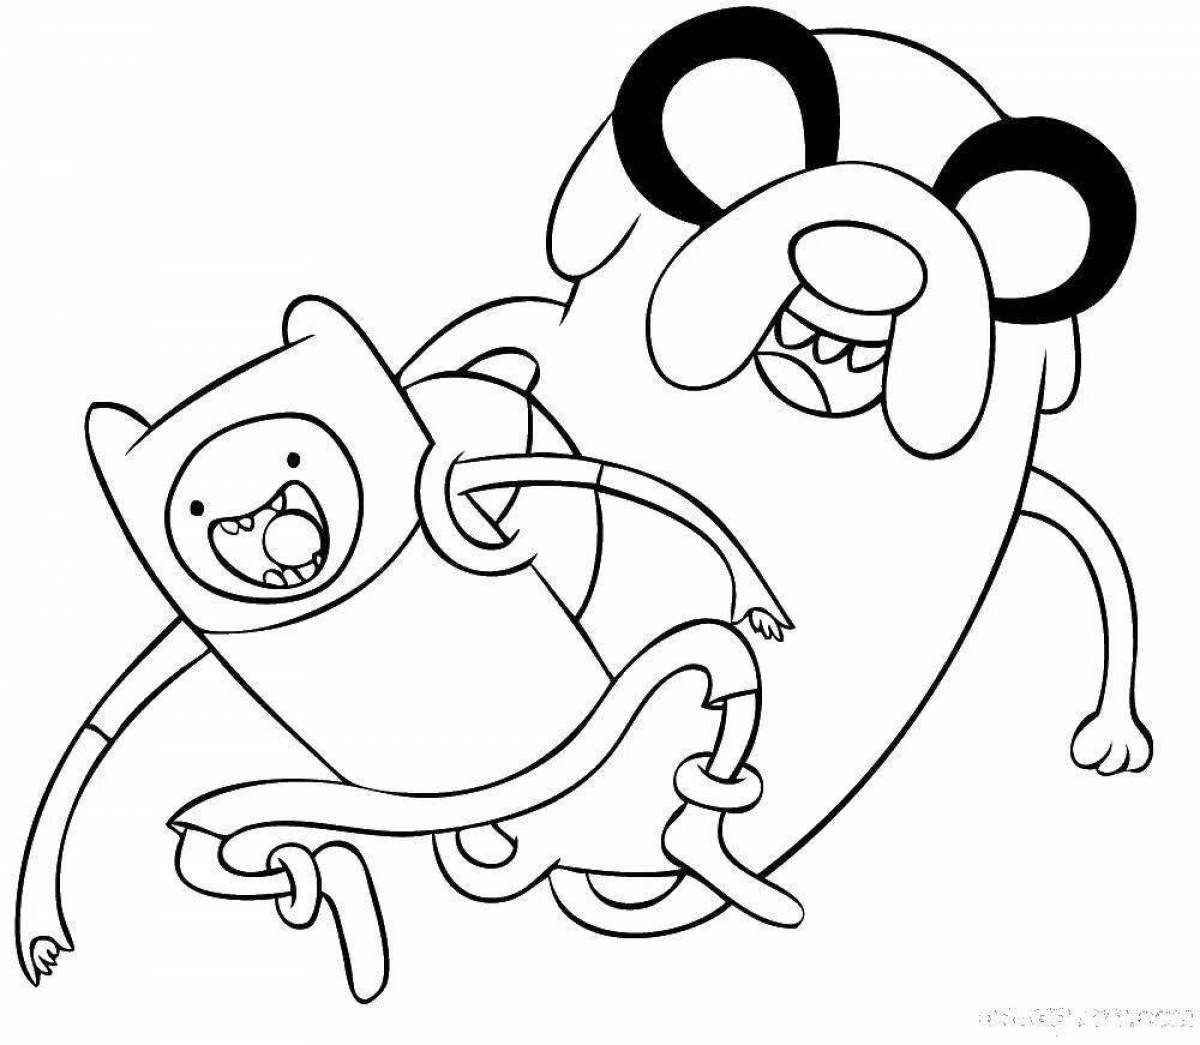 Fin and Jake from Adventure Time